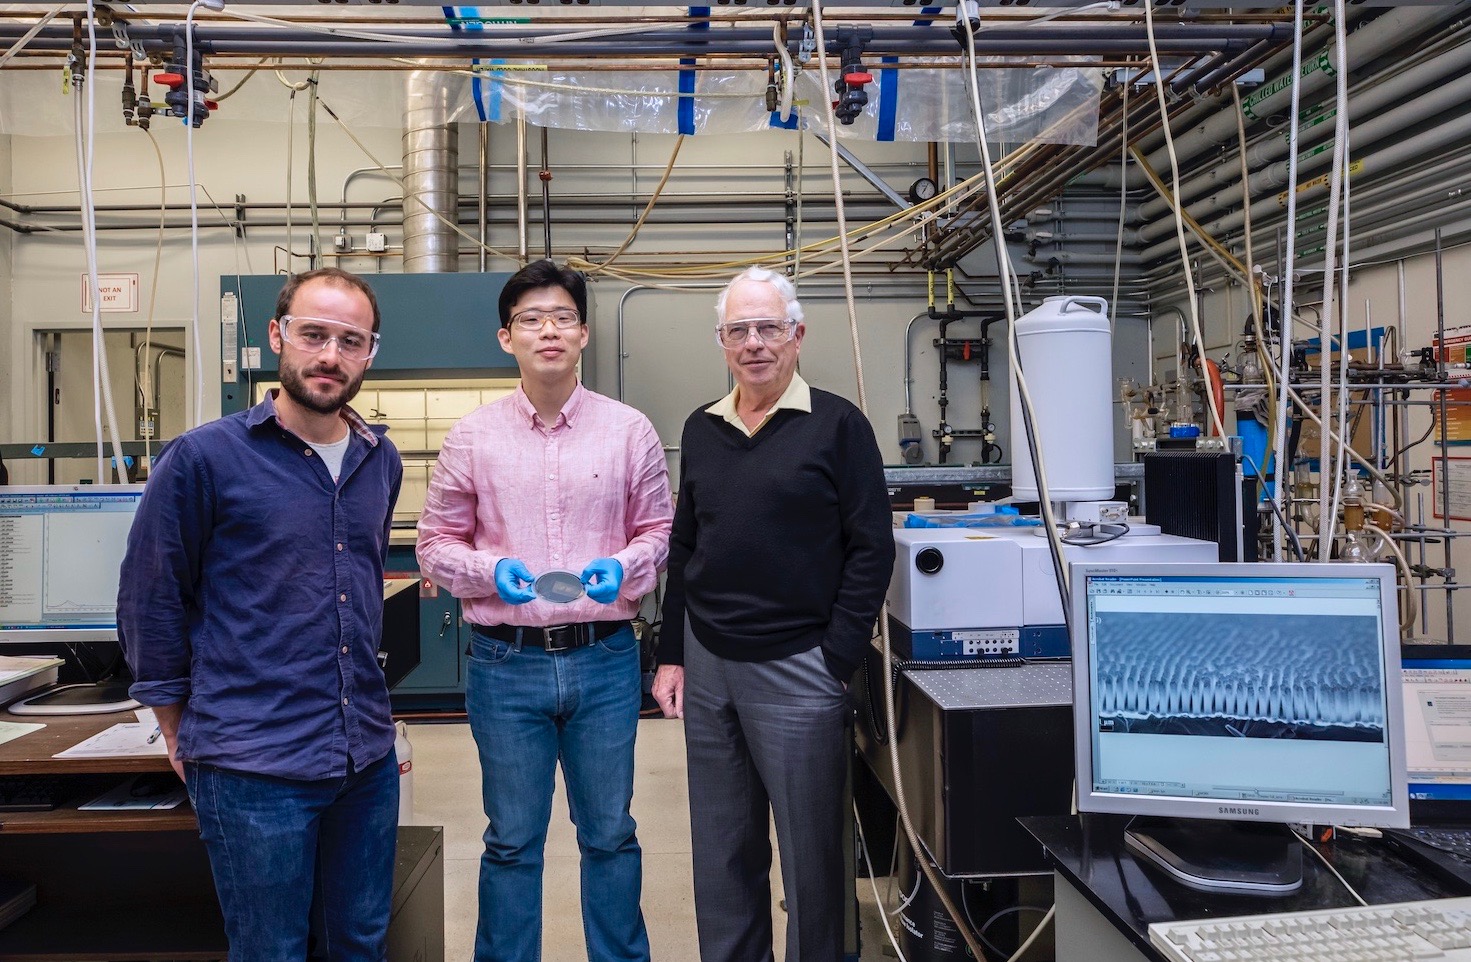 New potential renewable energy technology developed by Heinz Frei (right), Georgios Katsoukis (left), and Won Jun Jo at Lawrence Berkeley National Laboratory on Friday, February 28, 2020 in Berkeley, CA